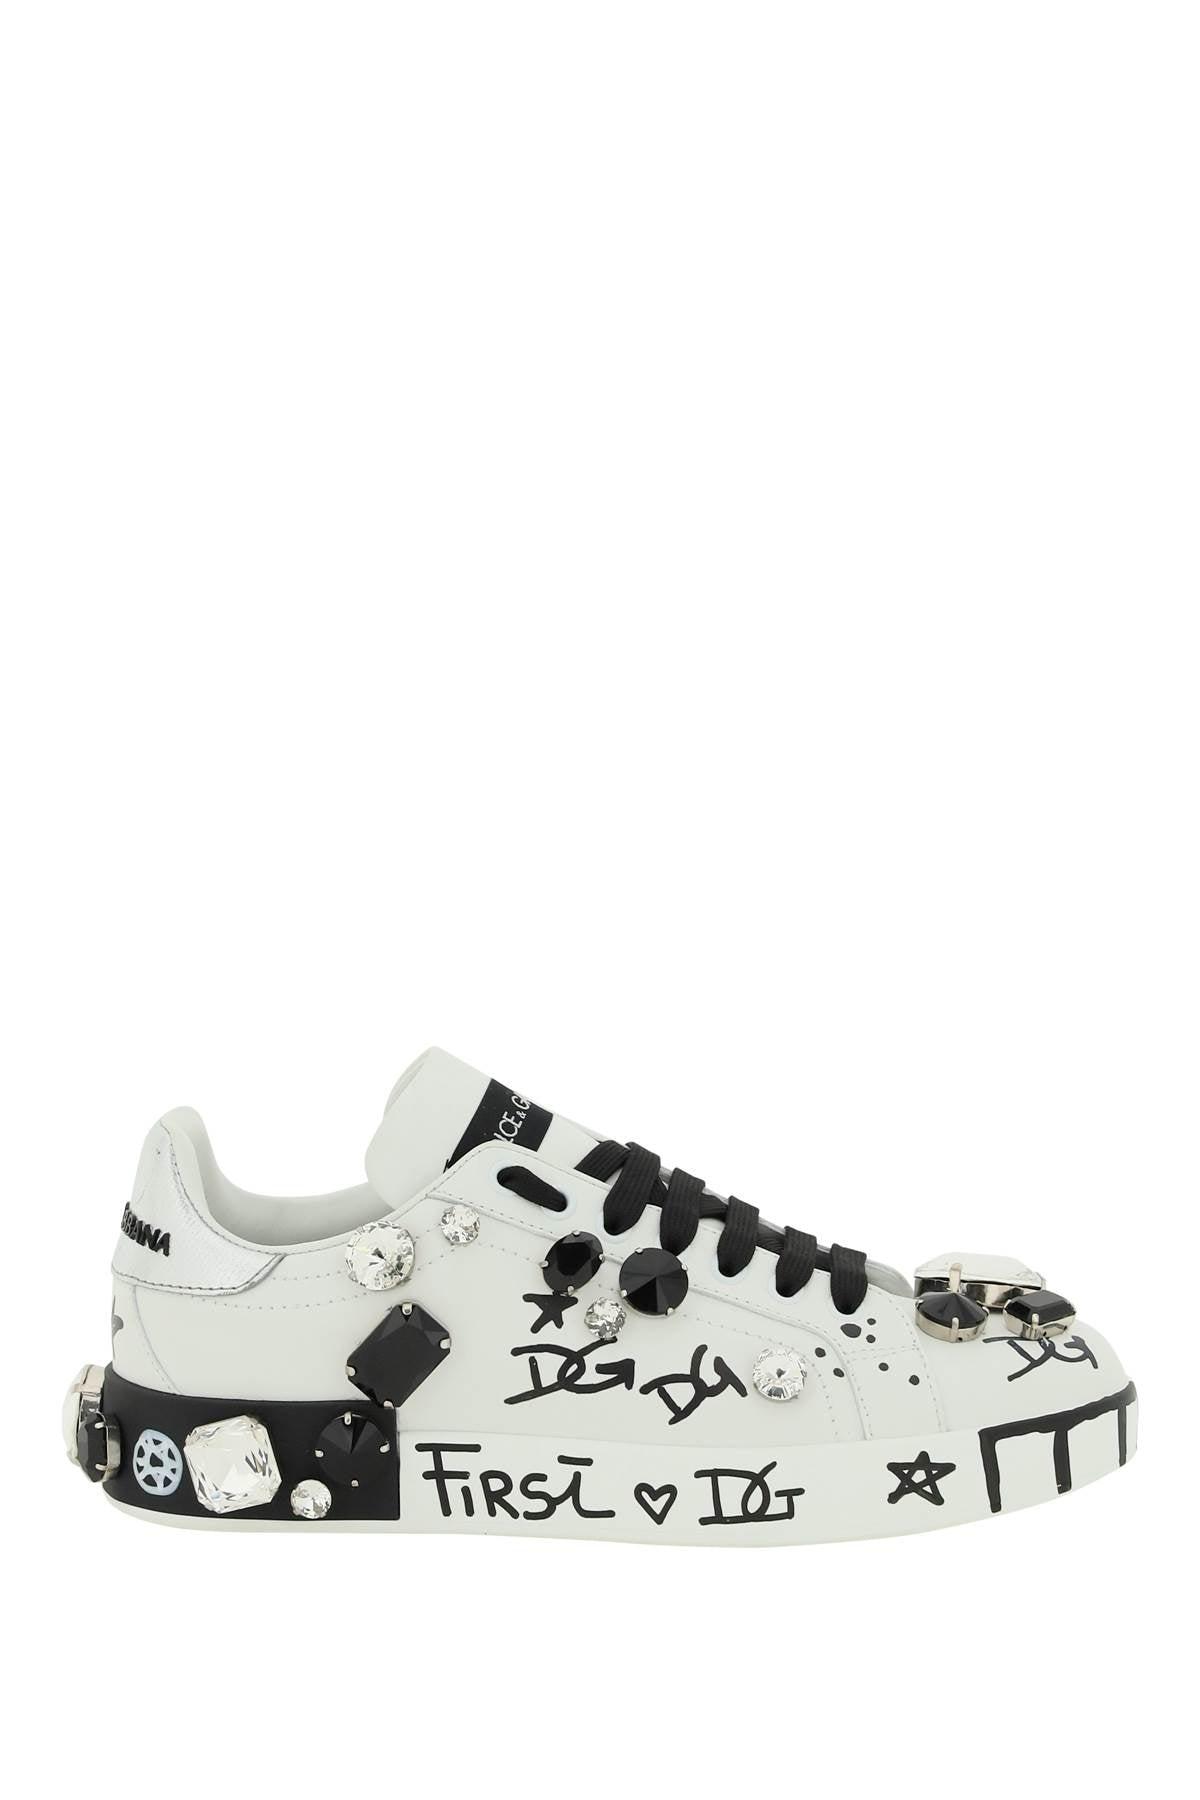 Dolce & Gabbana Printed Leather Portofino Sneakers With Stones in White |  Lyst